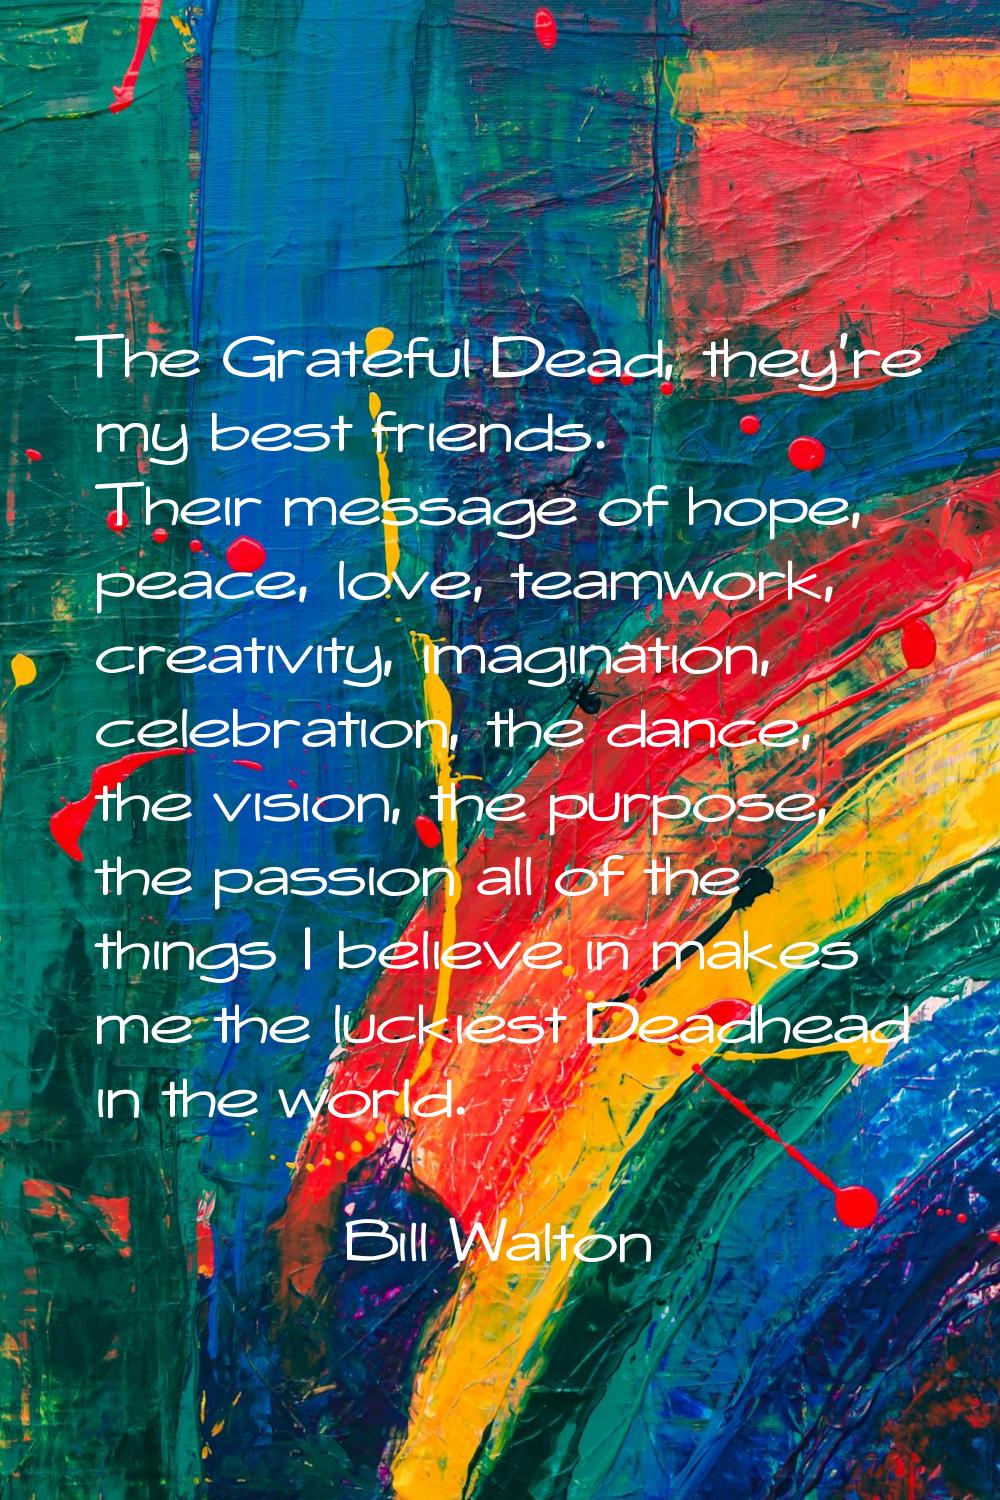 The Grateful Dead, they're my best friends. Their message of hope, peace, love, teamwork, creativit